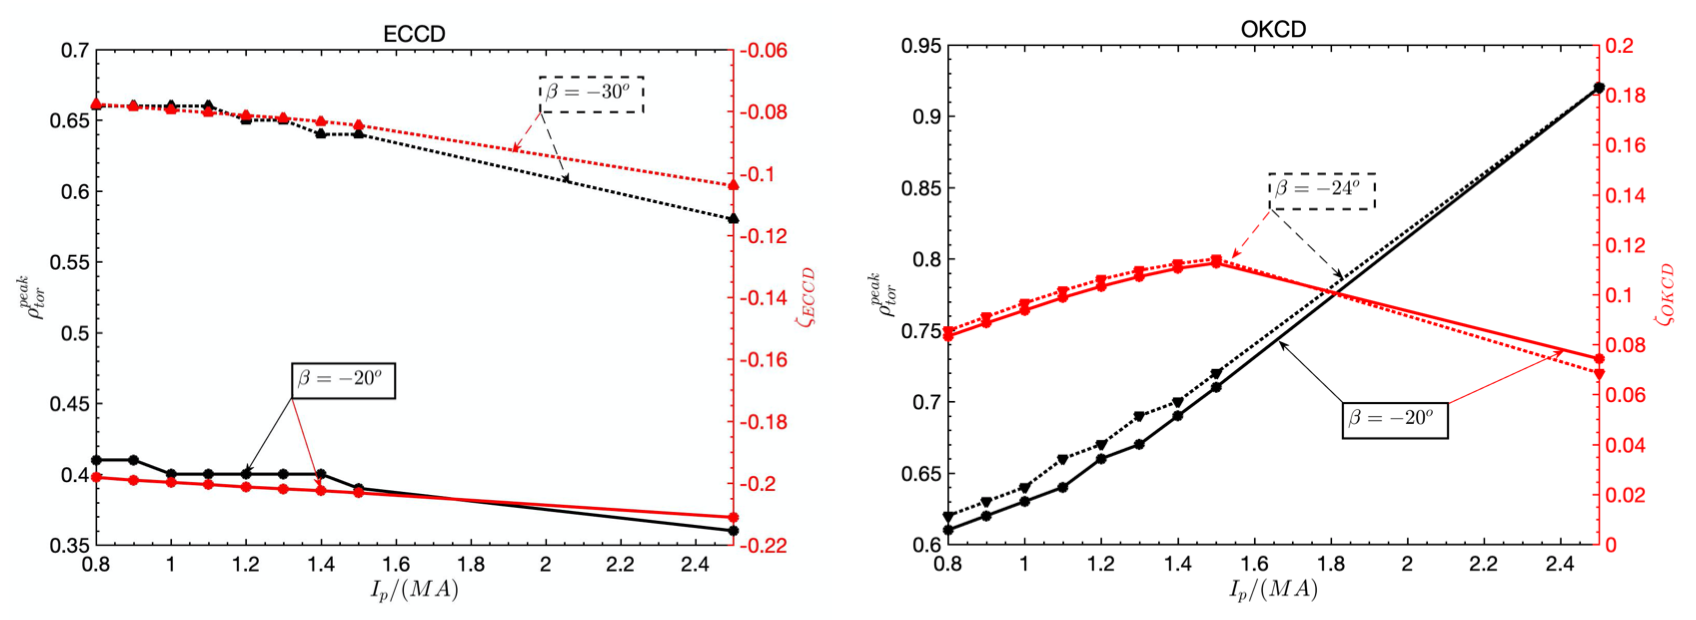 Effect of $I_{p}$ on ECCD (left) and OKCD (right).